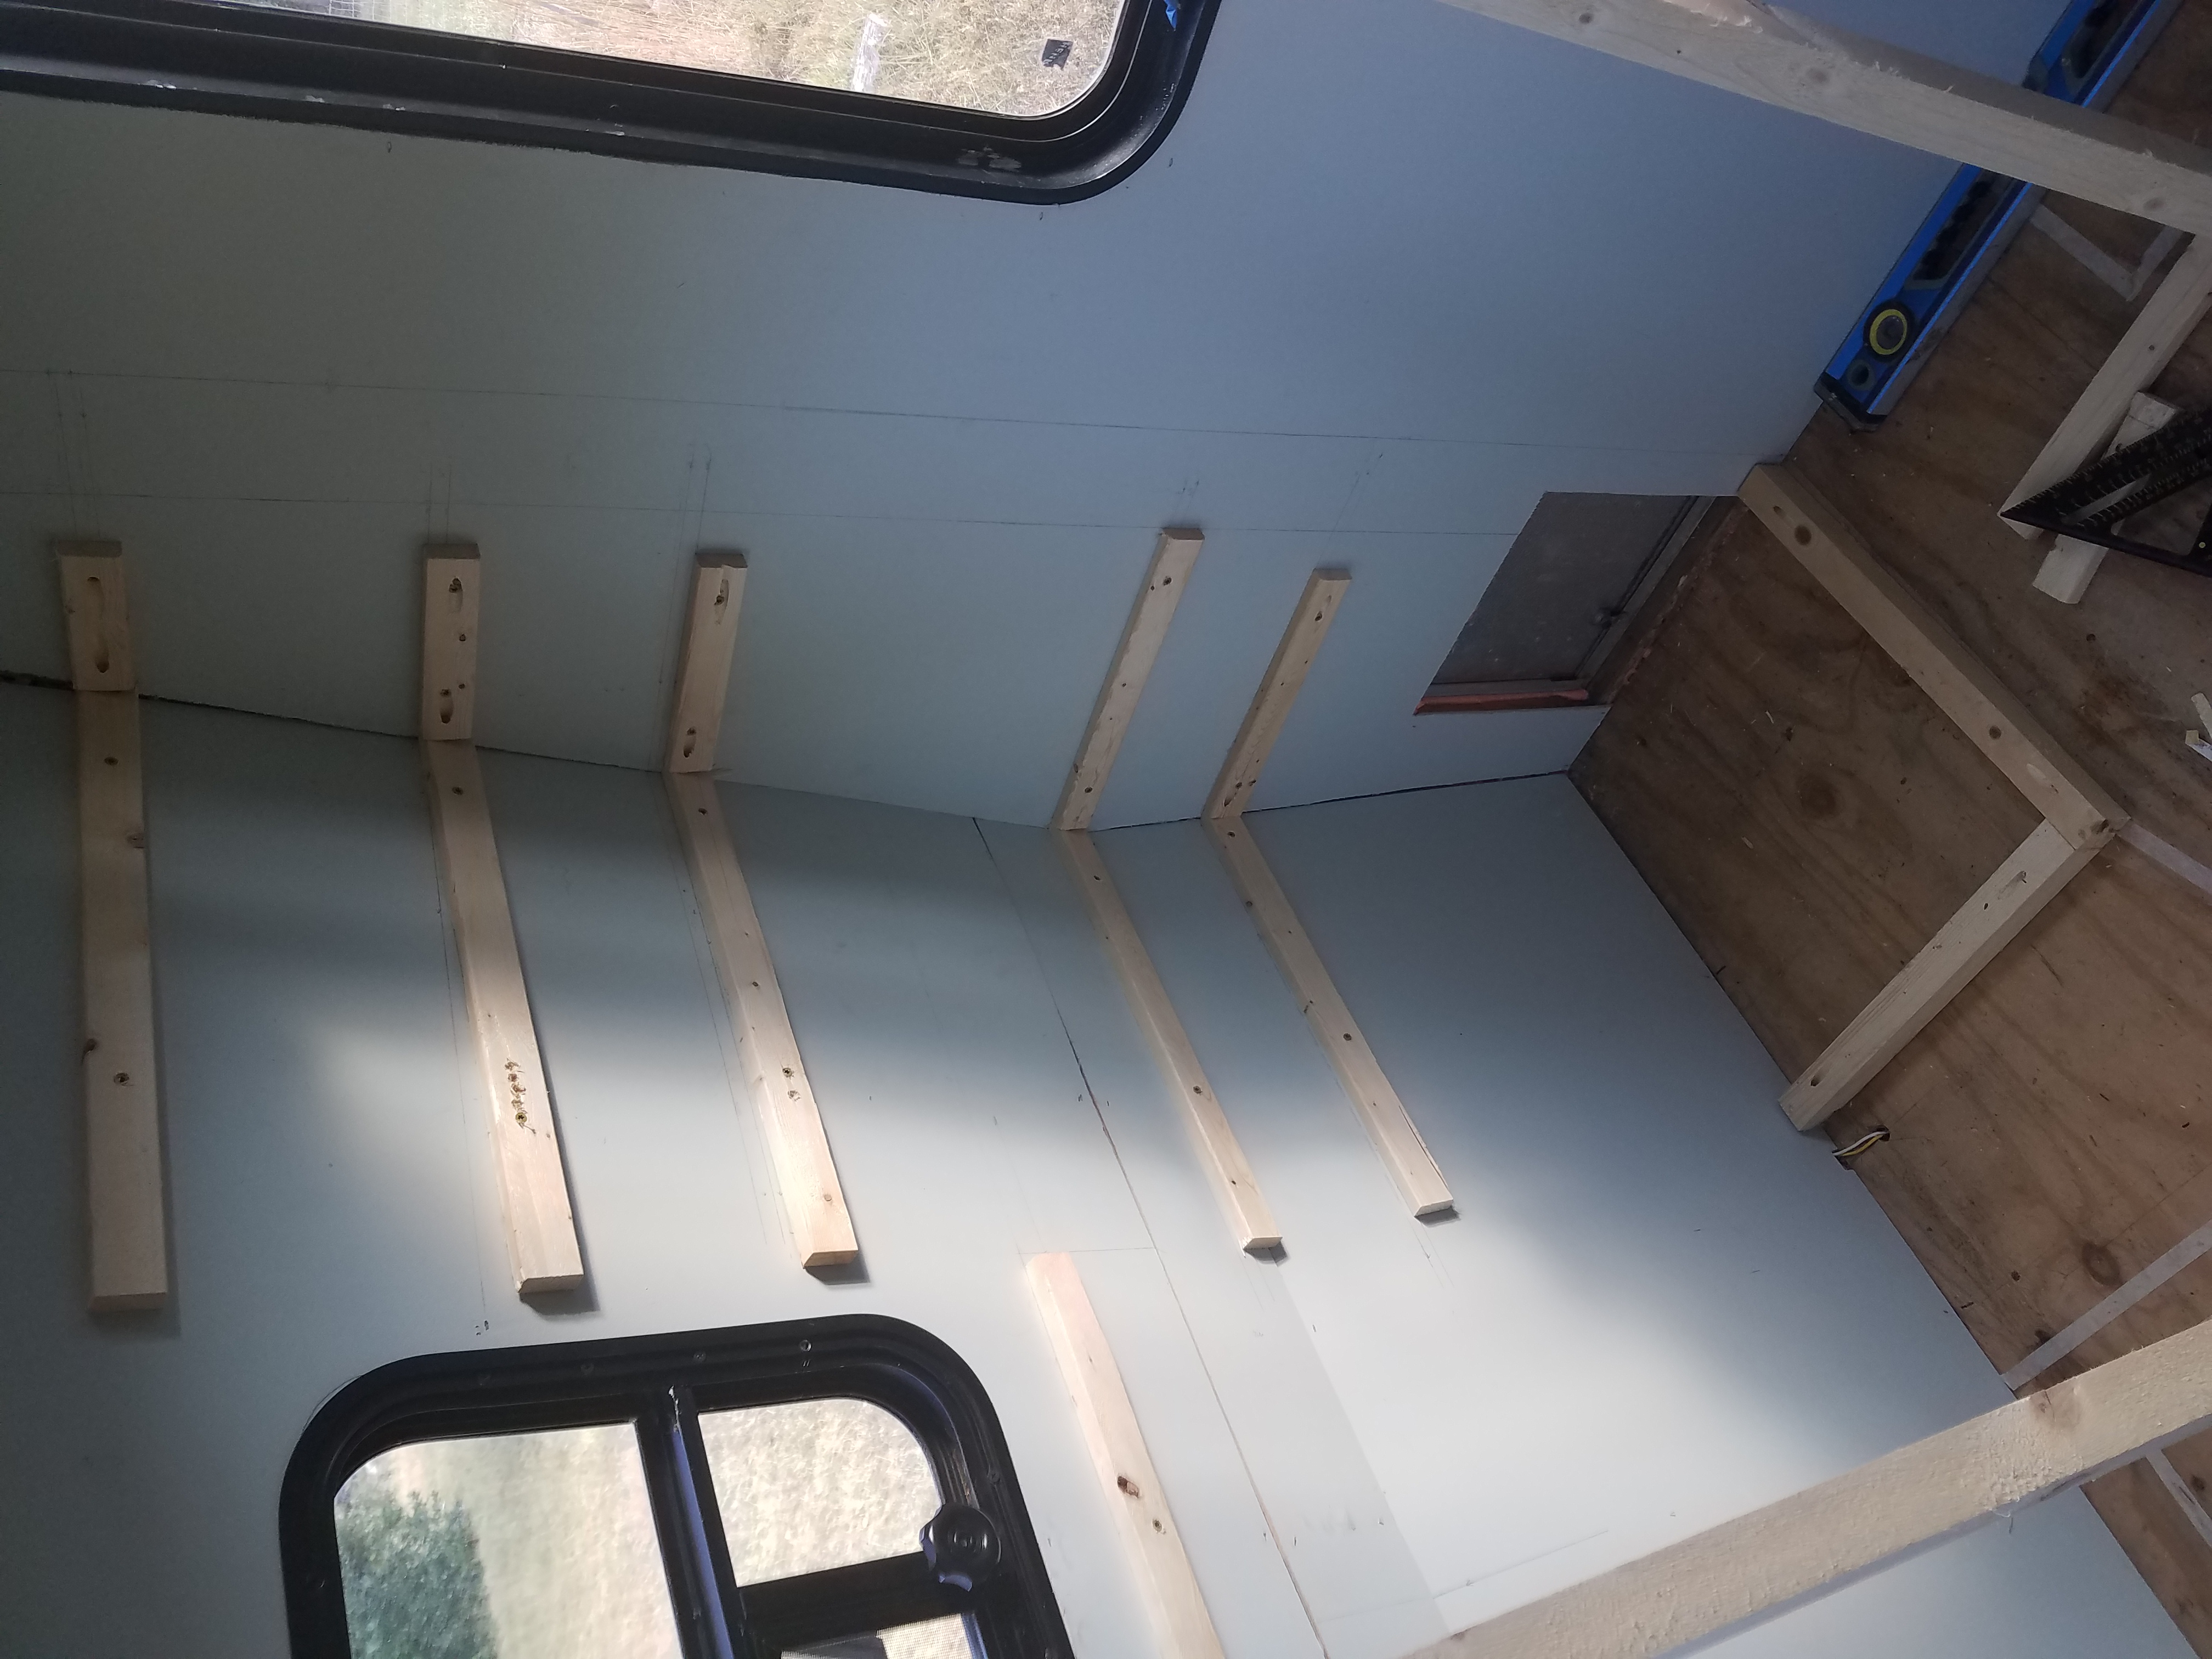 Bracing boards for the pantry shelving in the travel trailer kitchen